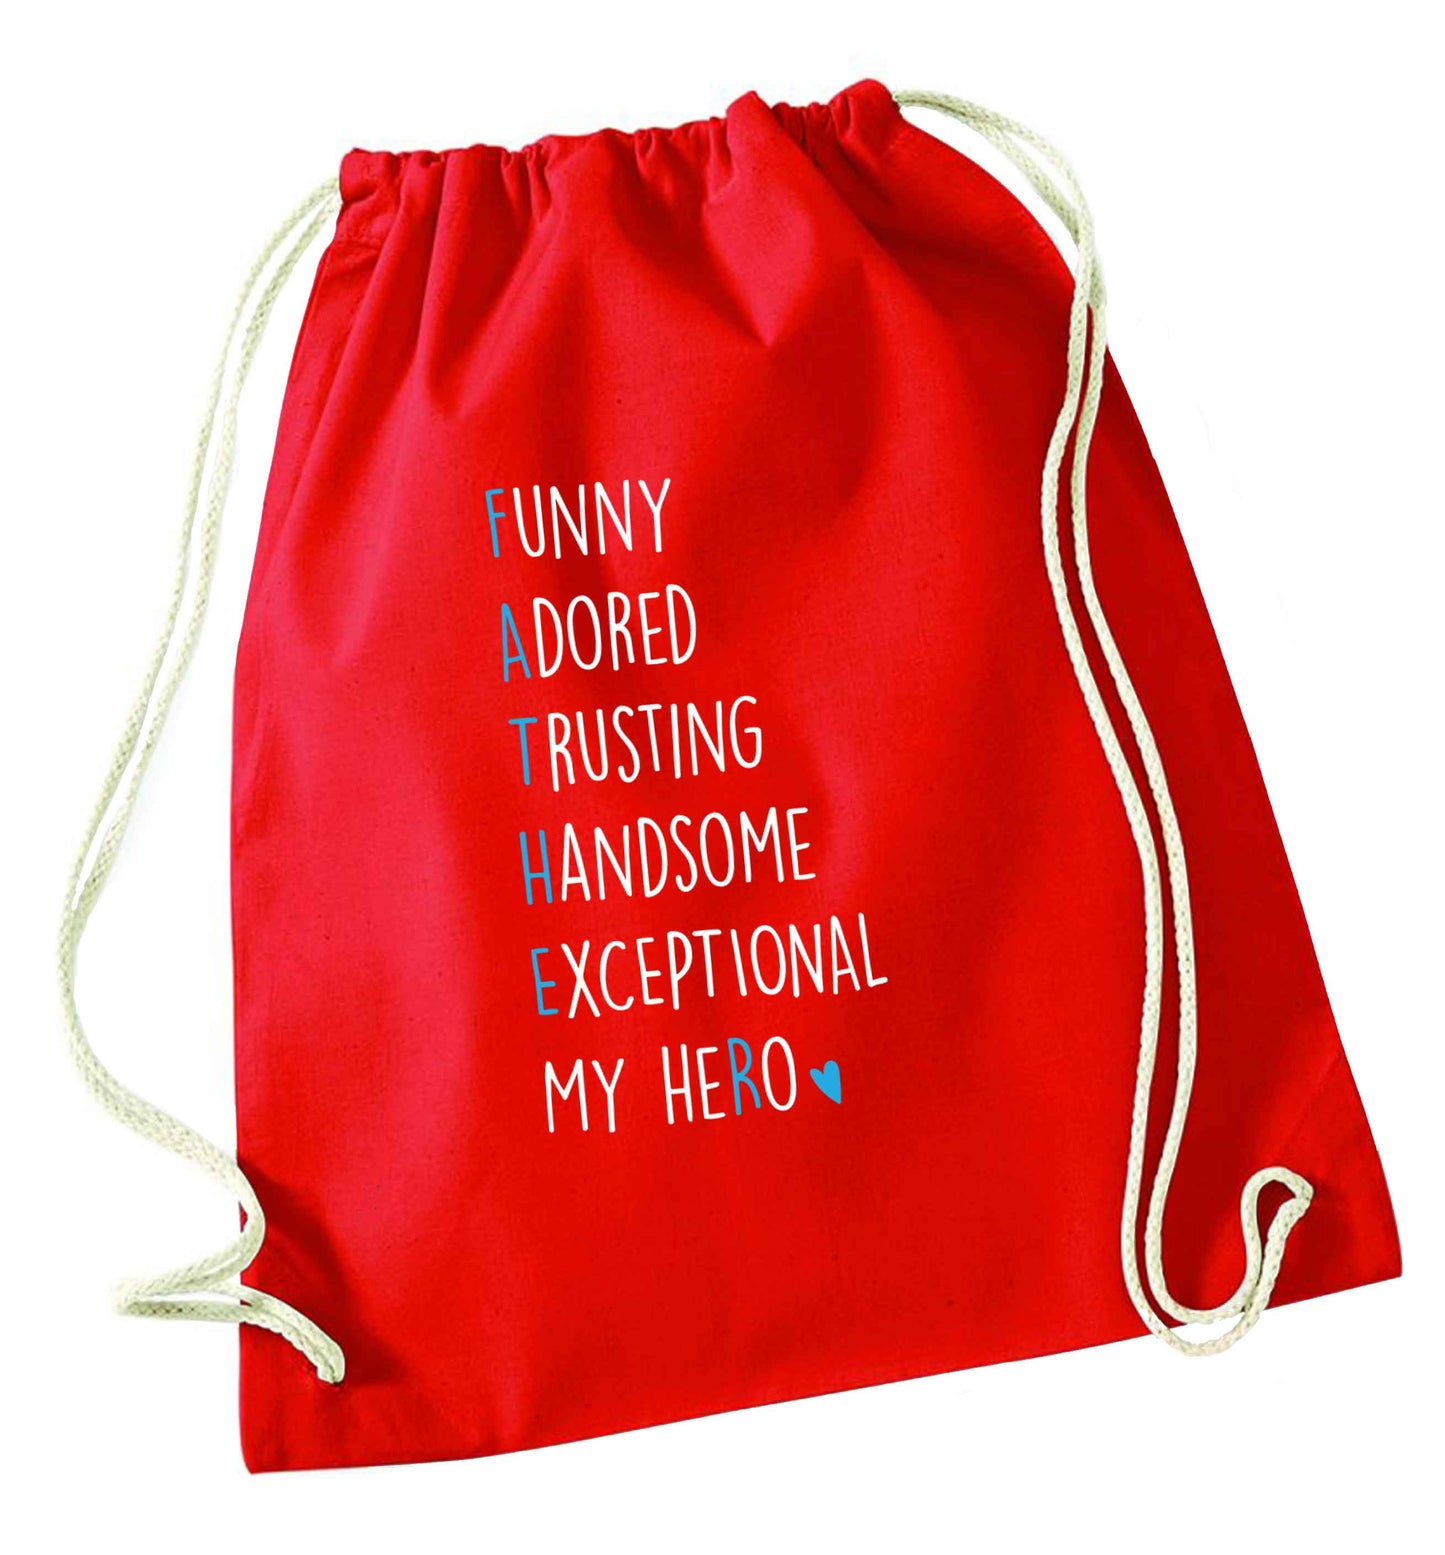 Father meaning hero acrostic poem red drawstring bag 